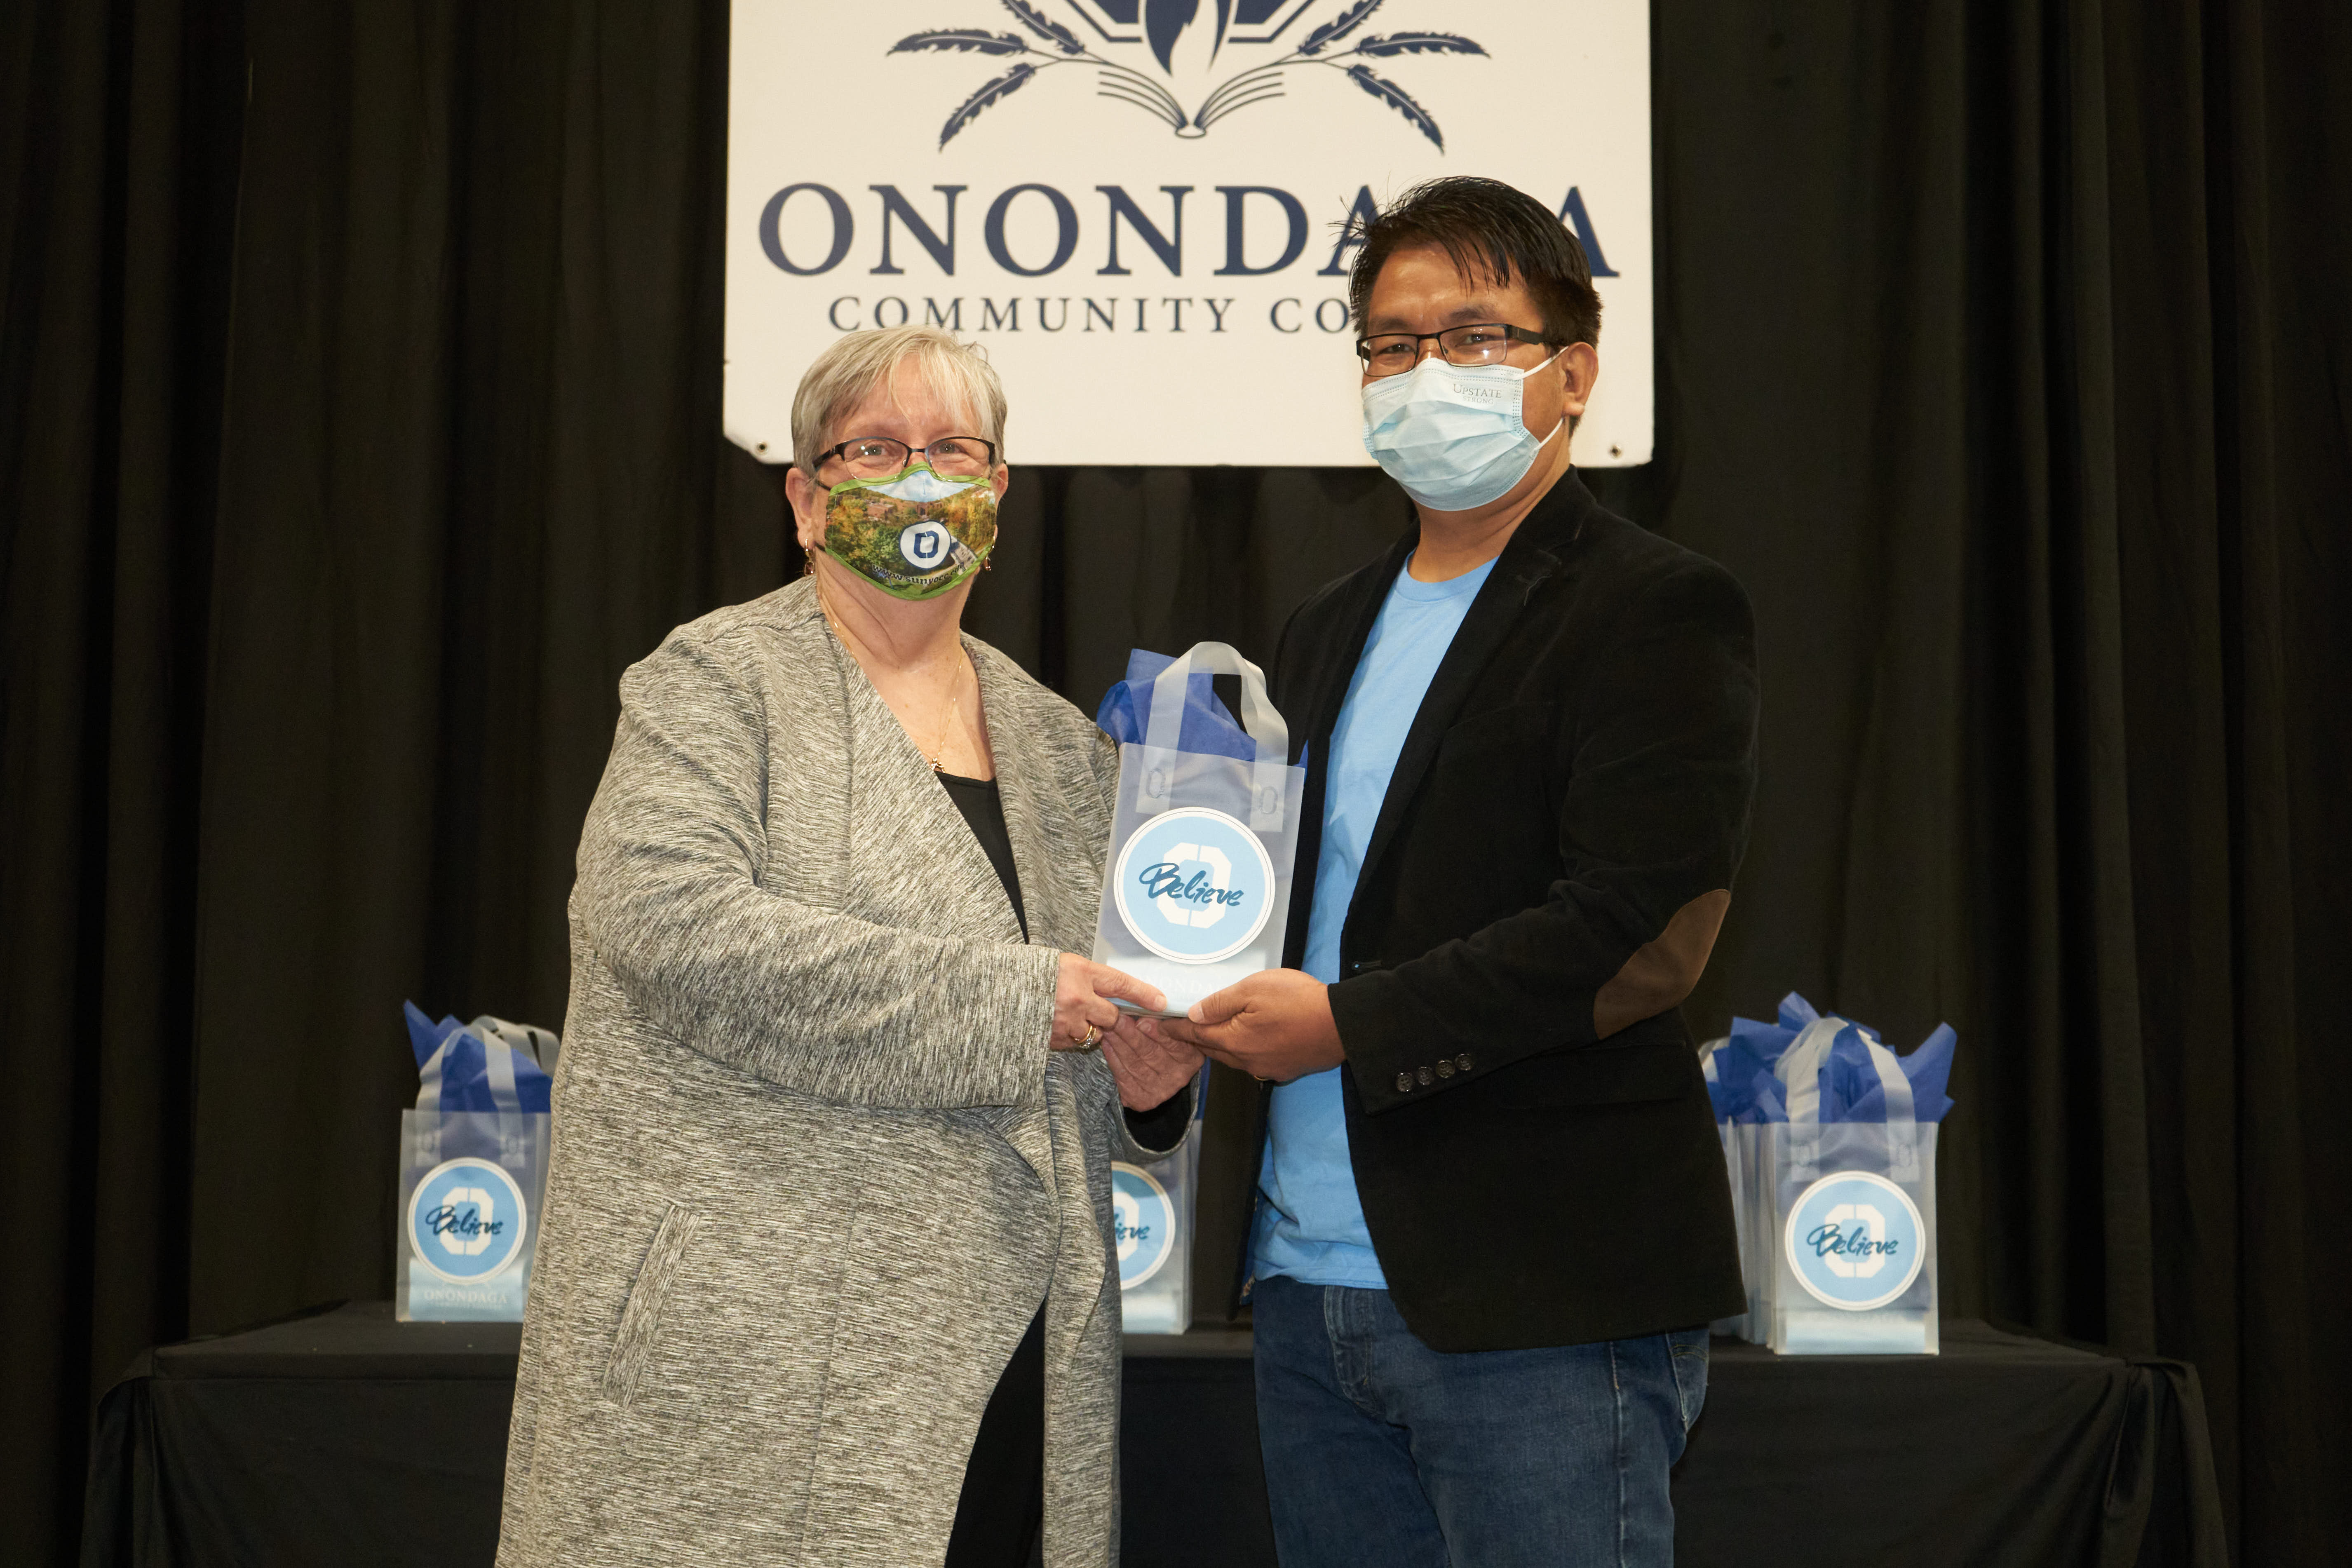 Communication Studies Curriculum Honoree Roben Awi (right) is pictured with OCC President Dr. Casey Crabill (left).